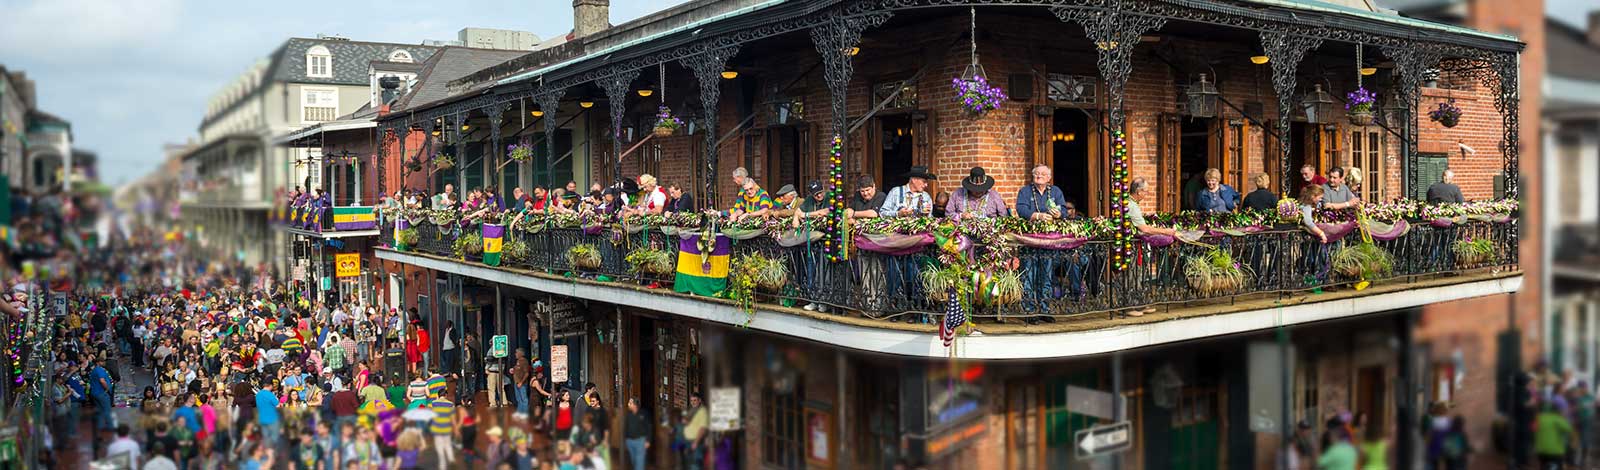 What To Do With Surplus Mardi Gras Beads | Mardi Gras New Orleans